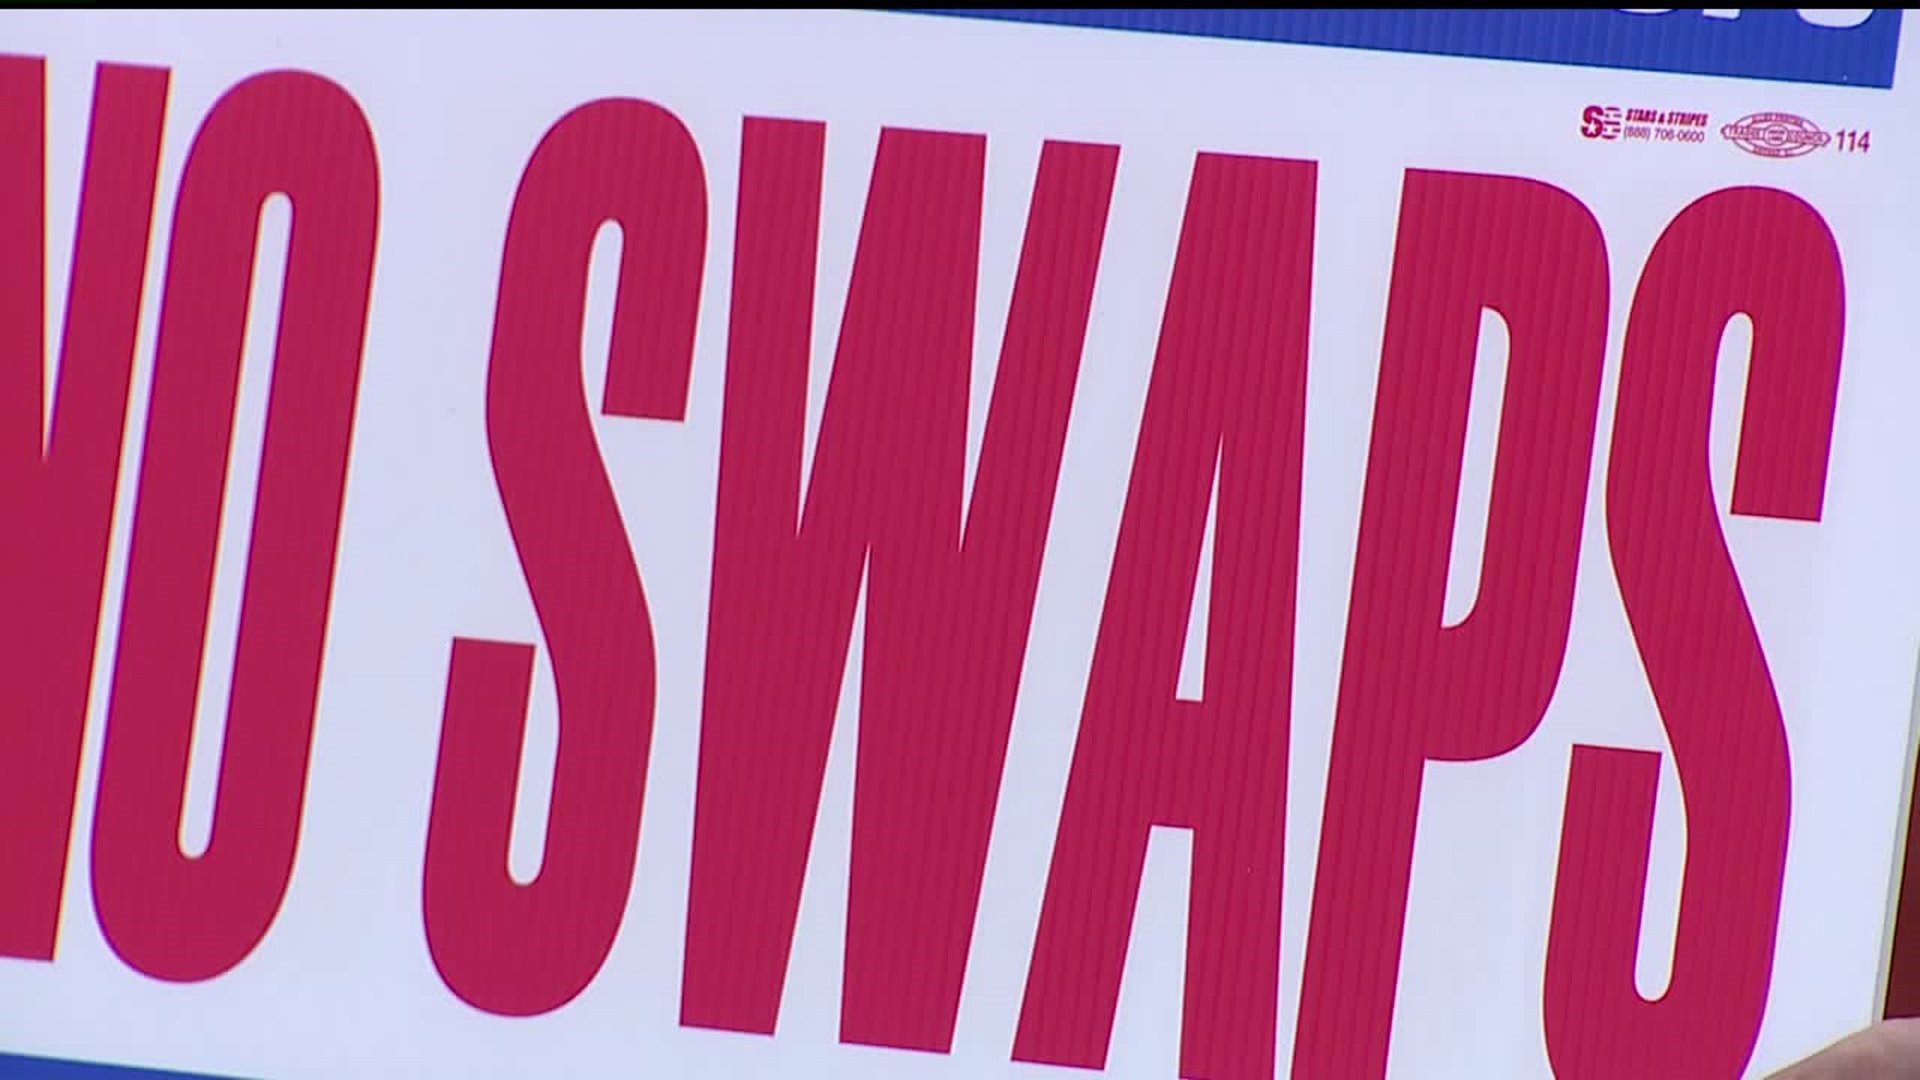 Coalition of local workers and businesses say `swaps` are bad for Quad Cities